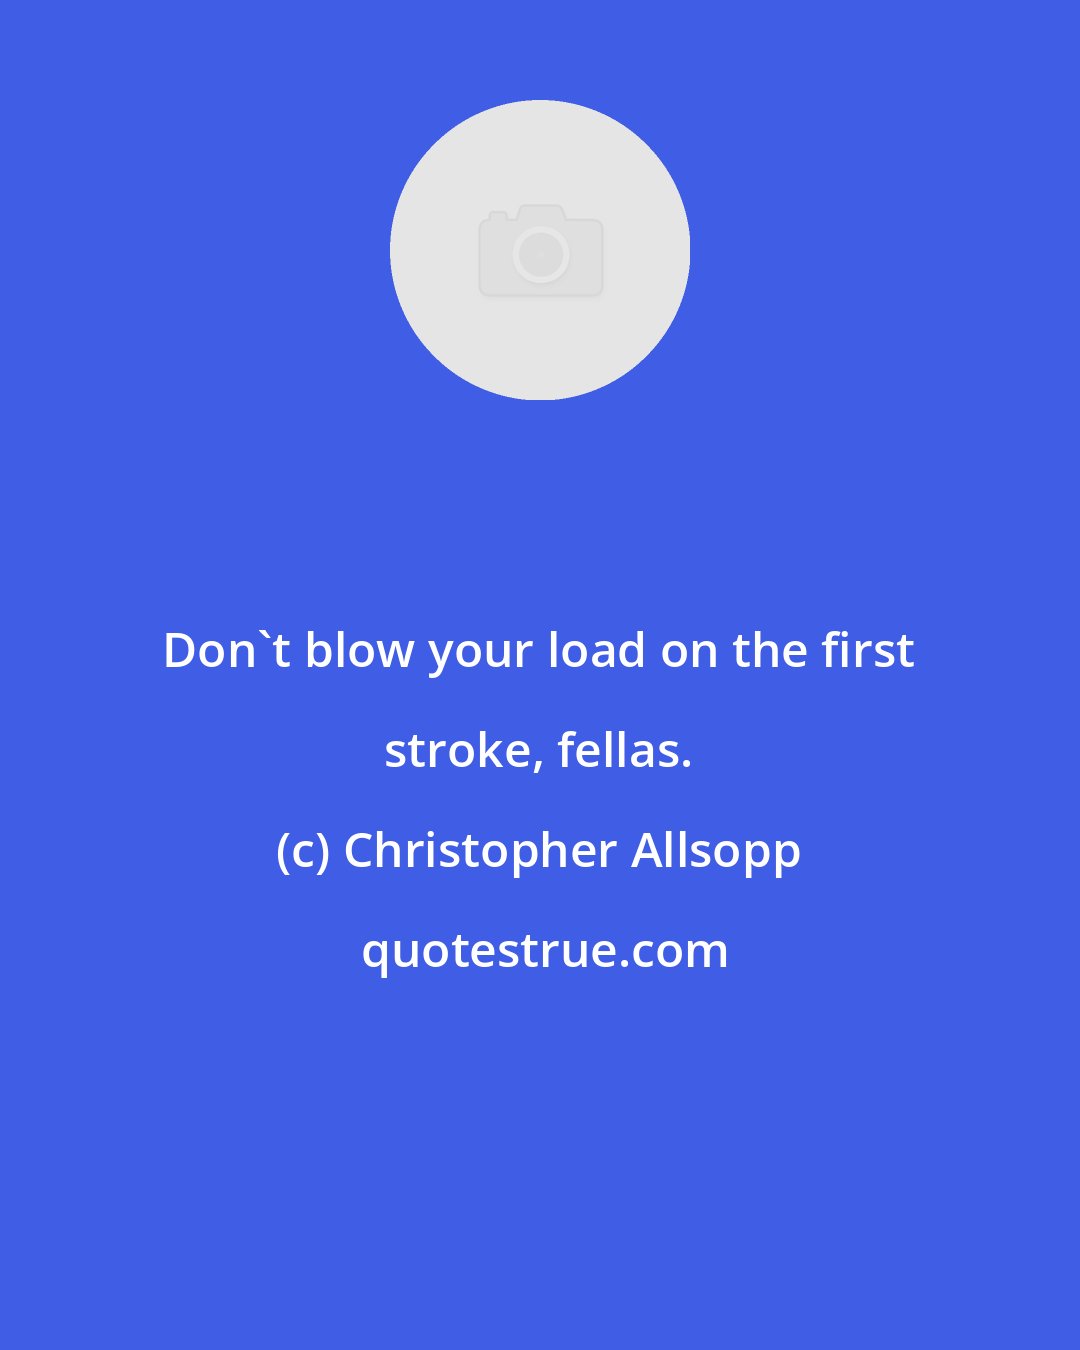 Christopher Allsopp: Don't blow your load on the first stroke, fellas.